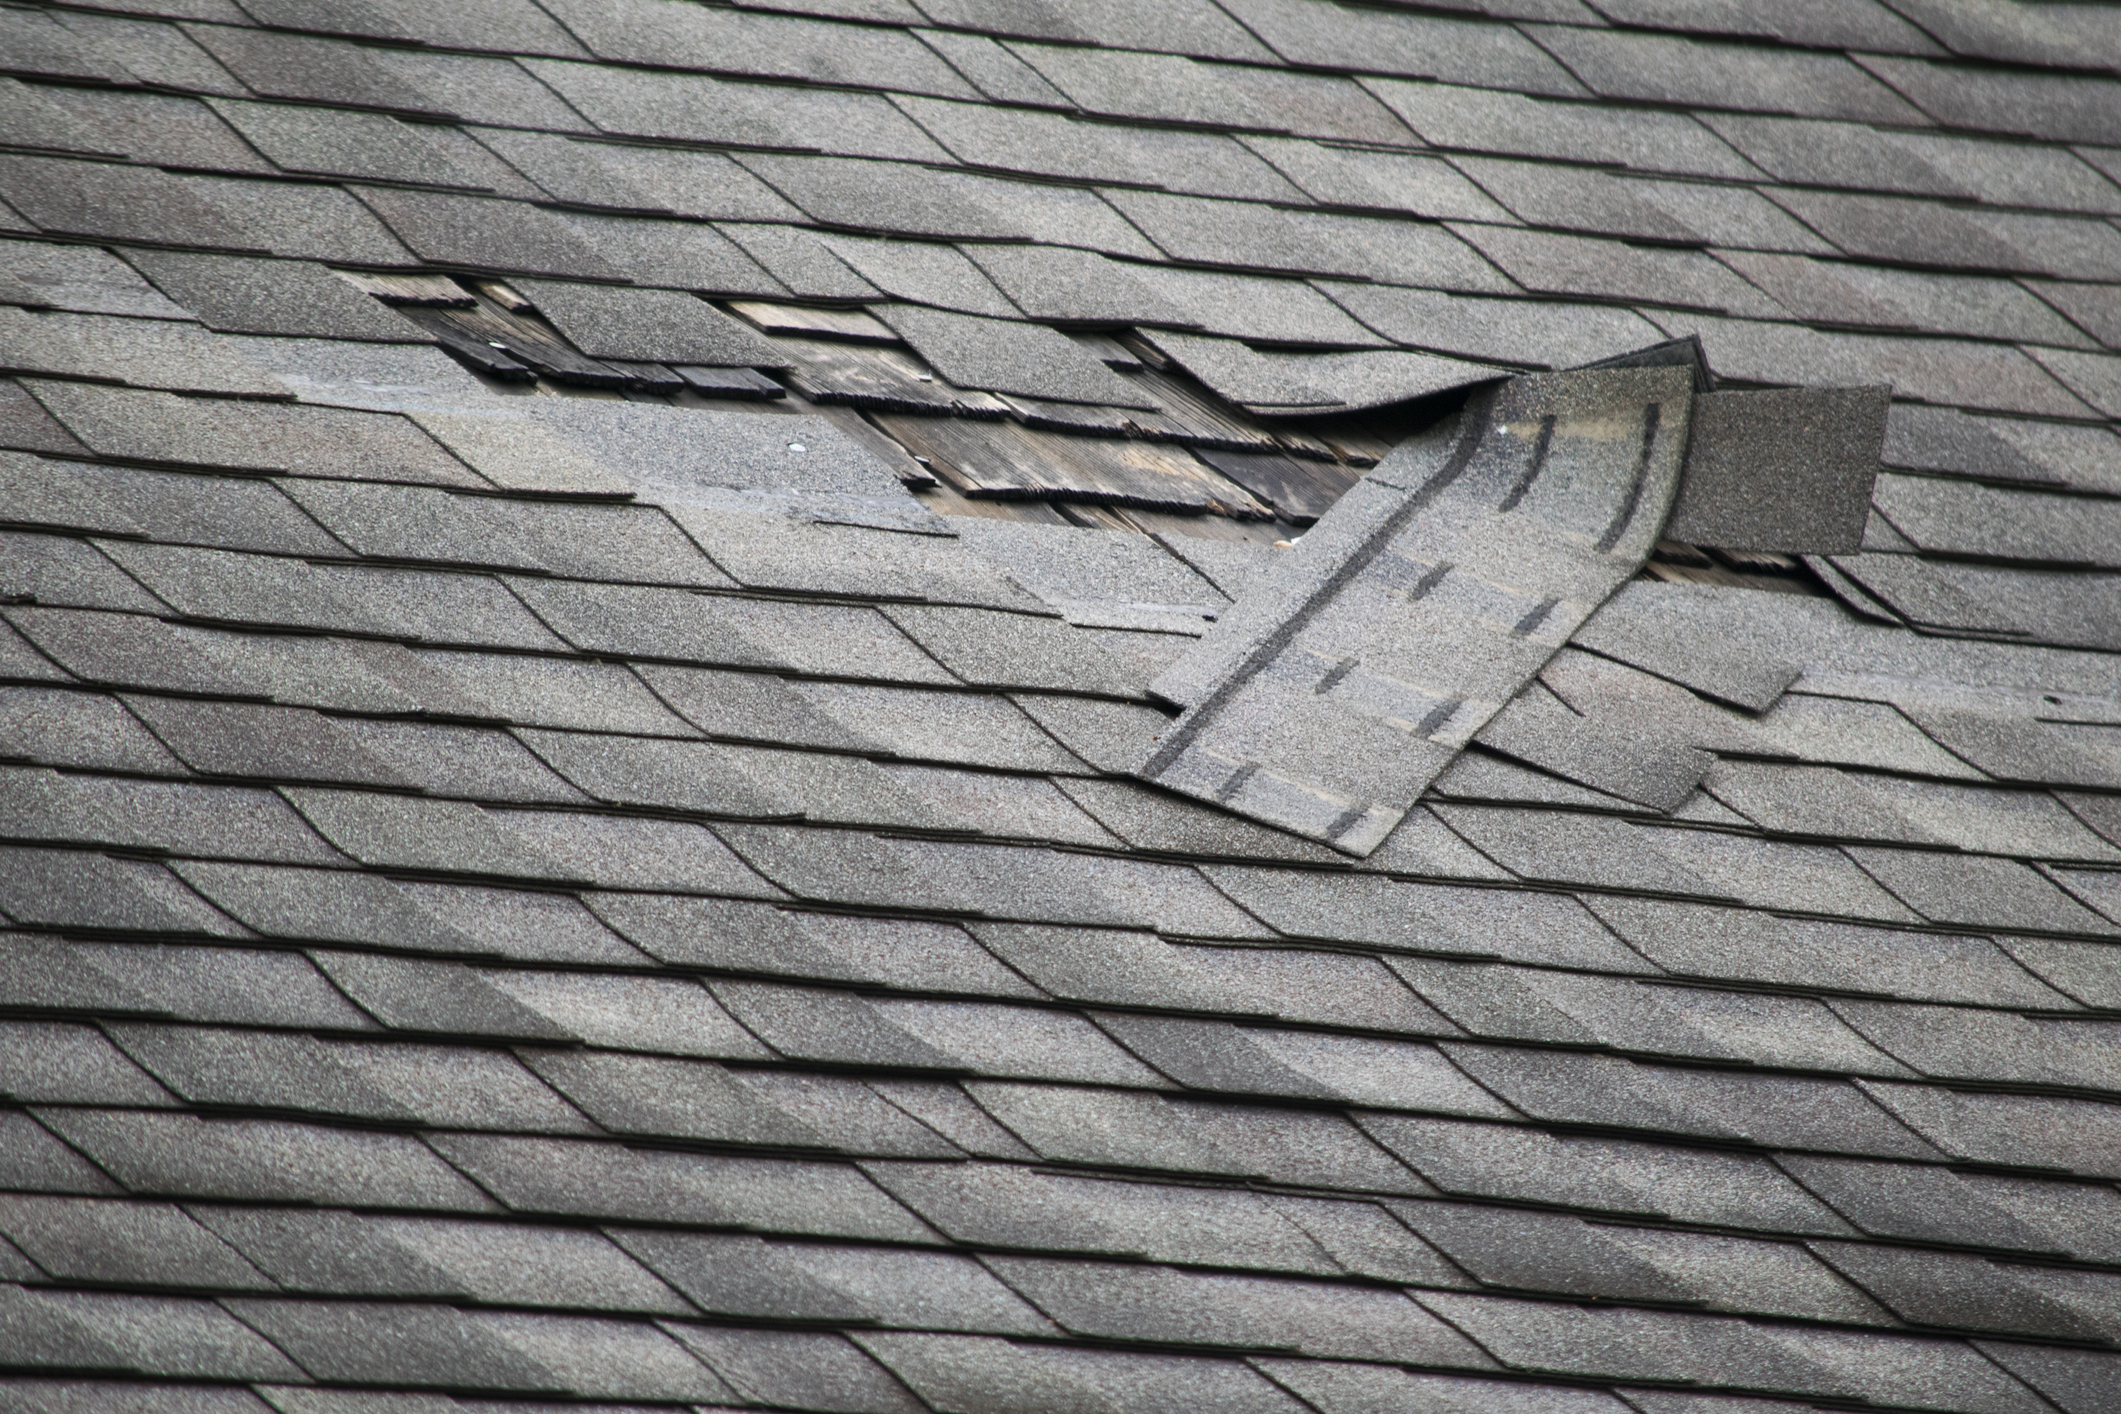 When it comes to roof shingles repair, Thomas Quality Construction has a dedicated team of professionals that repair roofs.